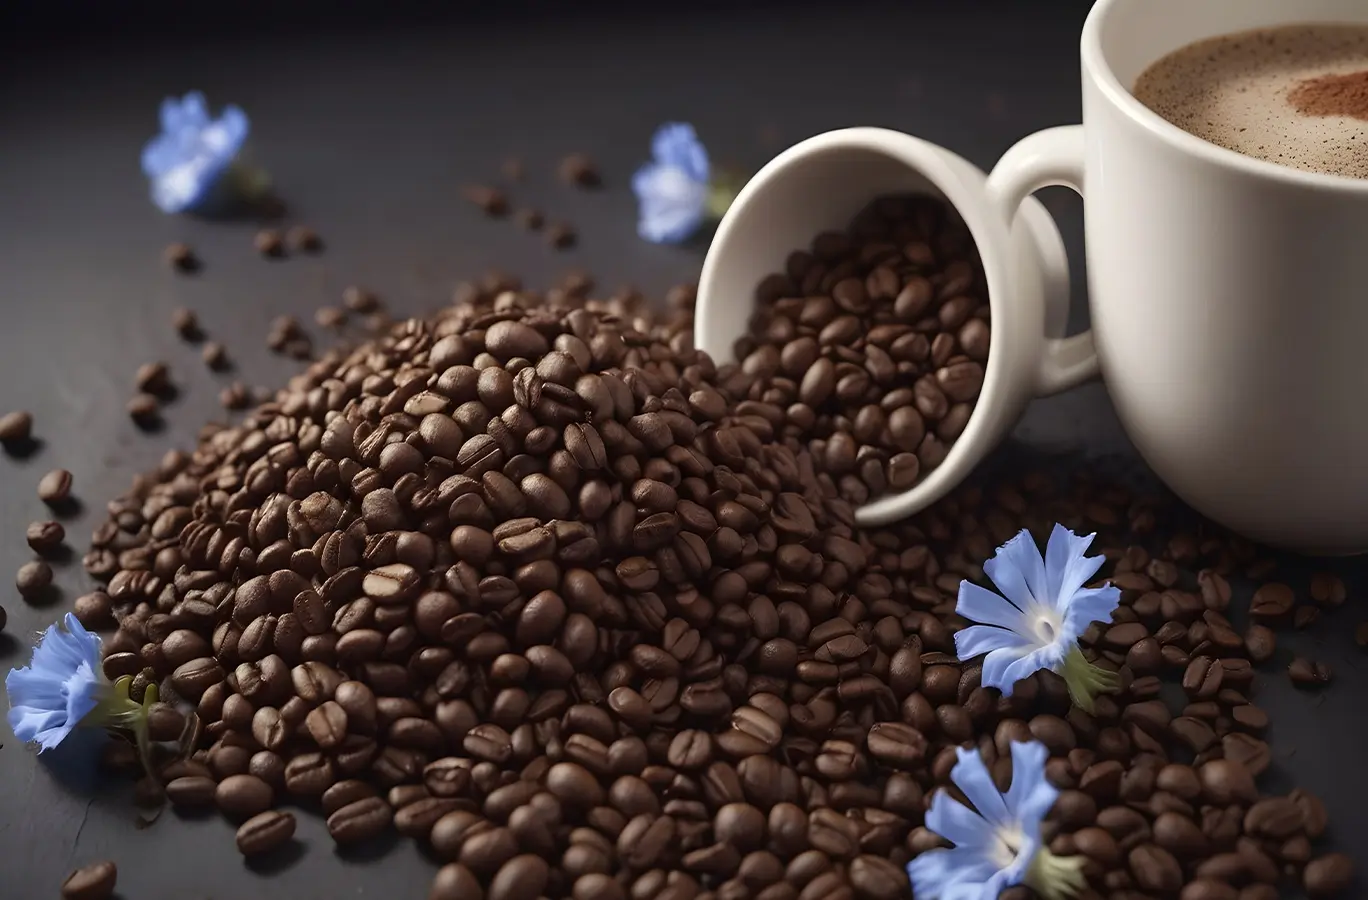 crushed coffee beans with some chicory flowers